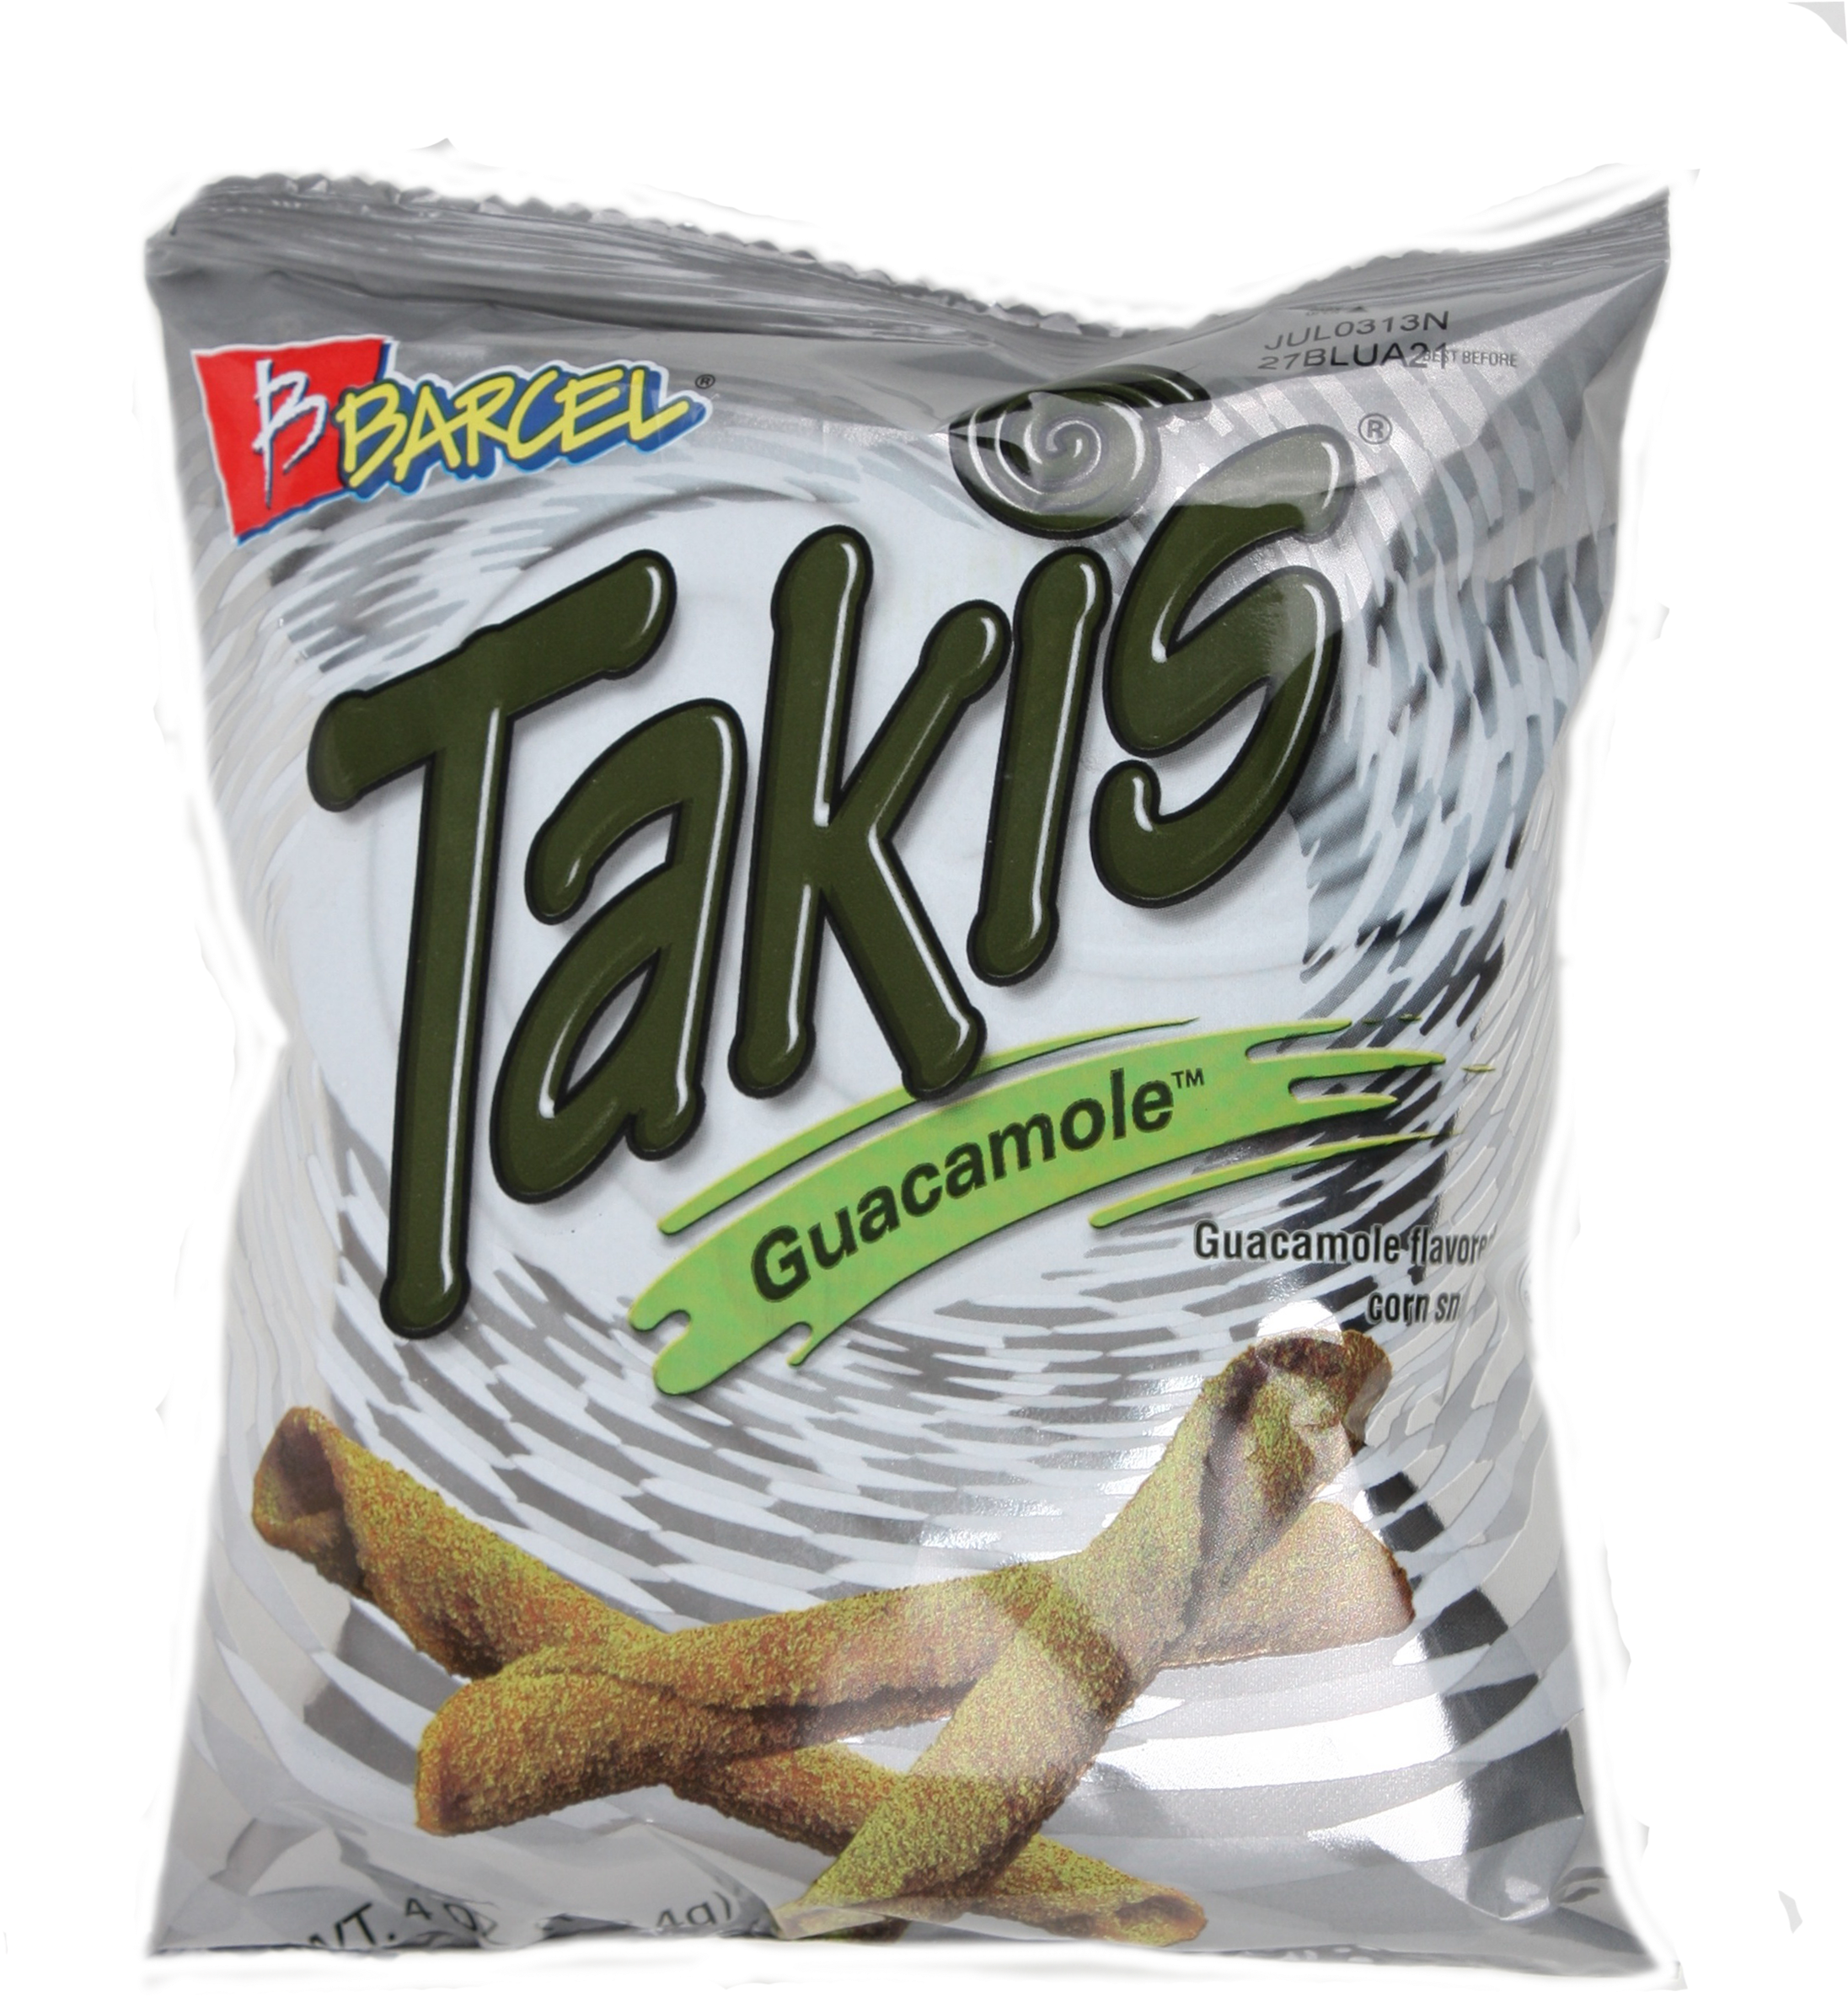 Takis Guacamole Flavored Snack Package